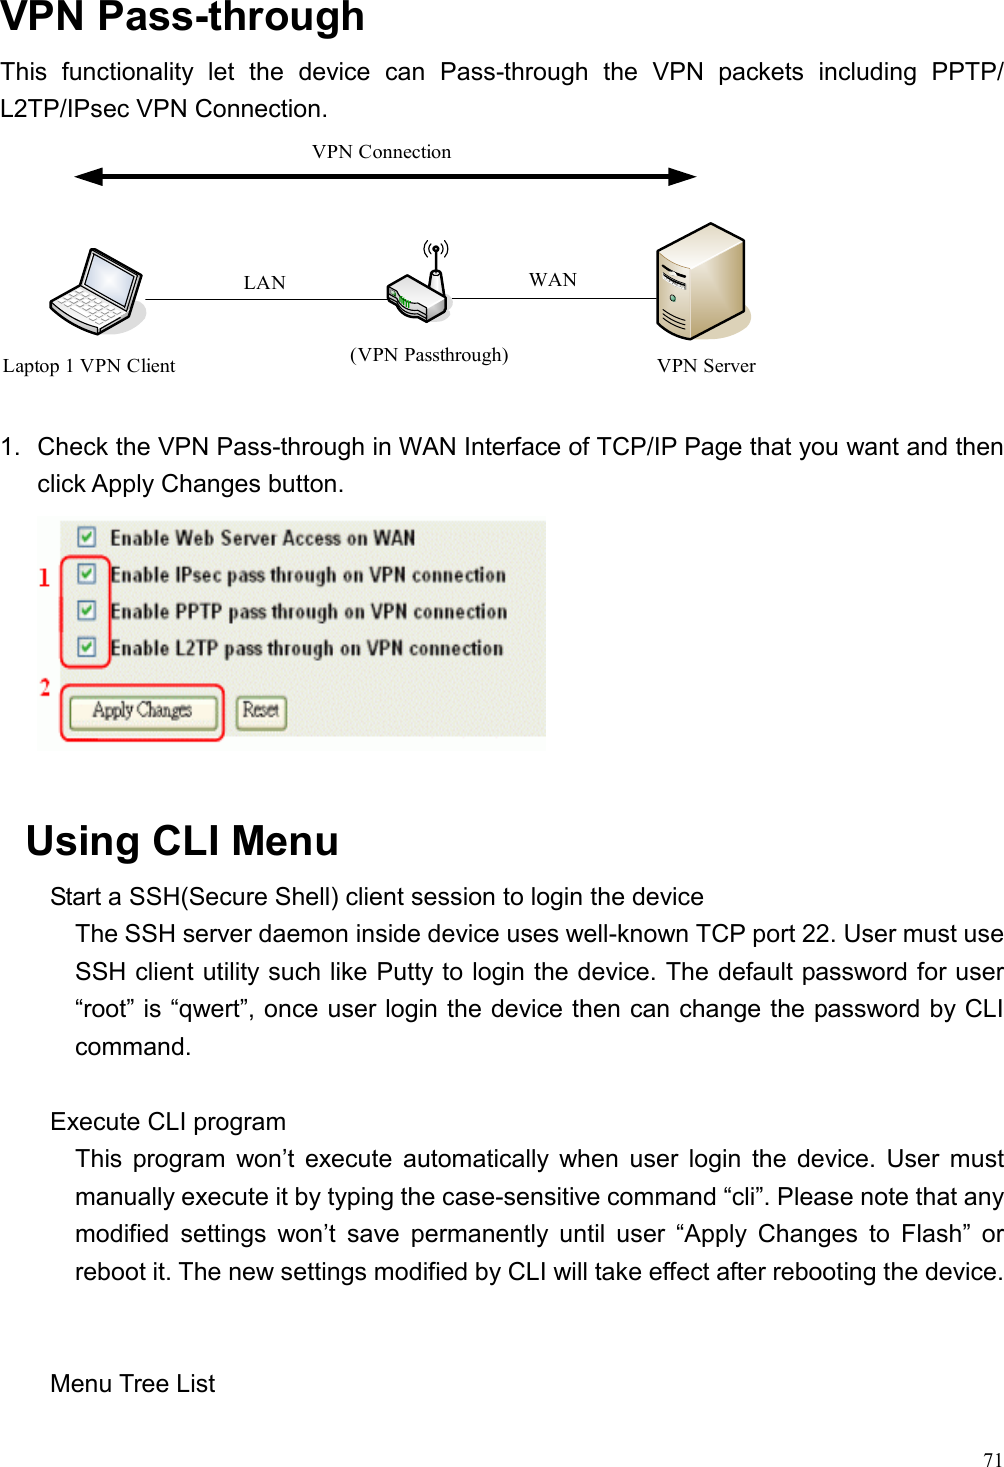  71 VPN Pass-through This functionality let the device can Pass-through the VPN packets including PPTP/ L2TP/IPsec VPN Connection. VPN Server(VPN Passthrough)WANLaptop 1 VPN ClientVPN ConnectionLAN  1.  Check the VPN Pass-through in WAN Interface of TCP/IP Page that you want and then click Apply Changes button.   Using CLI Menu Start a SSH(Secure Shell) client session to login the device The SSH server daemon inside device uses well-known TCP port 22. User must use SSH client utility such like Putty to login the device. The default password for user “root” is “qwert”, once user login the device then can change the password by CLI command.  Execute CLI program This program won’t execute automatically when user login the device. User must manually execute it by typing the case-sensitive command “cli”. Please note that any modified settings won’t save permanently until user “Apply Changes to Flash” or reboot it. The new settings modified by CLI will take effect after rebooting the device.   Menu Tree List 